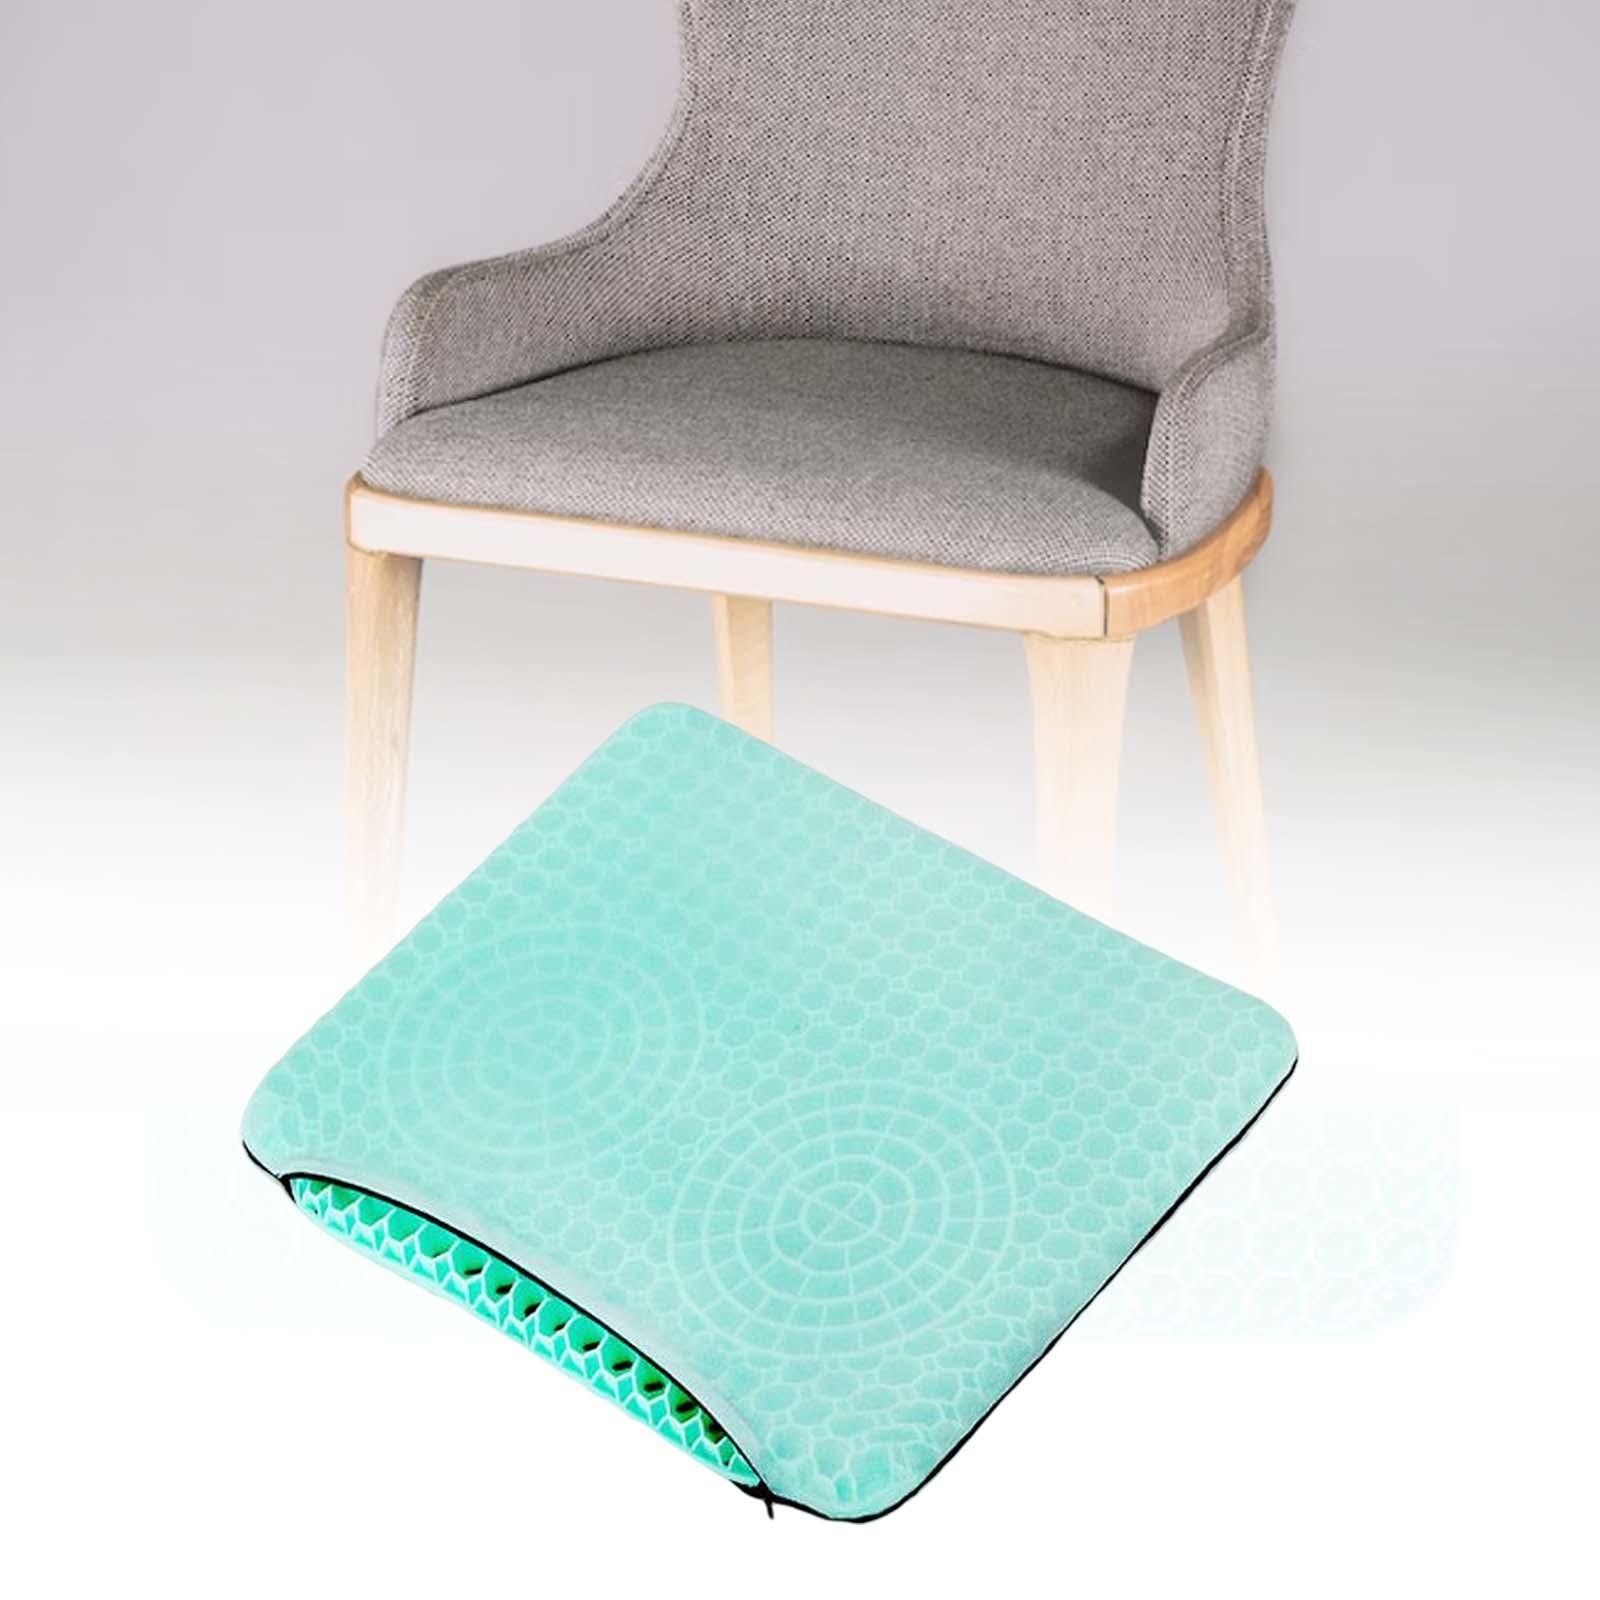 Gel Seat Cushion Comfortable Honeycomb Gel Cushion for Home Traveling Cushion With Cover